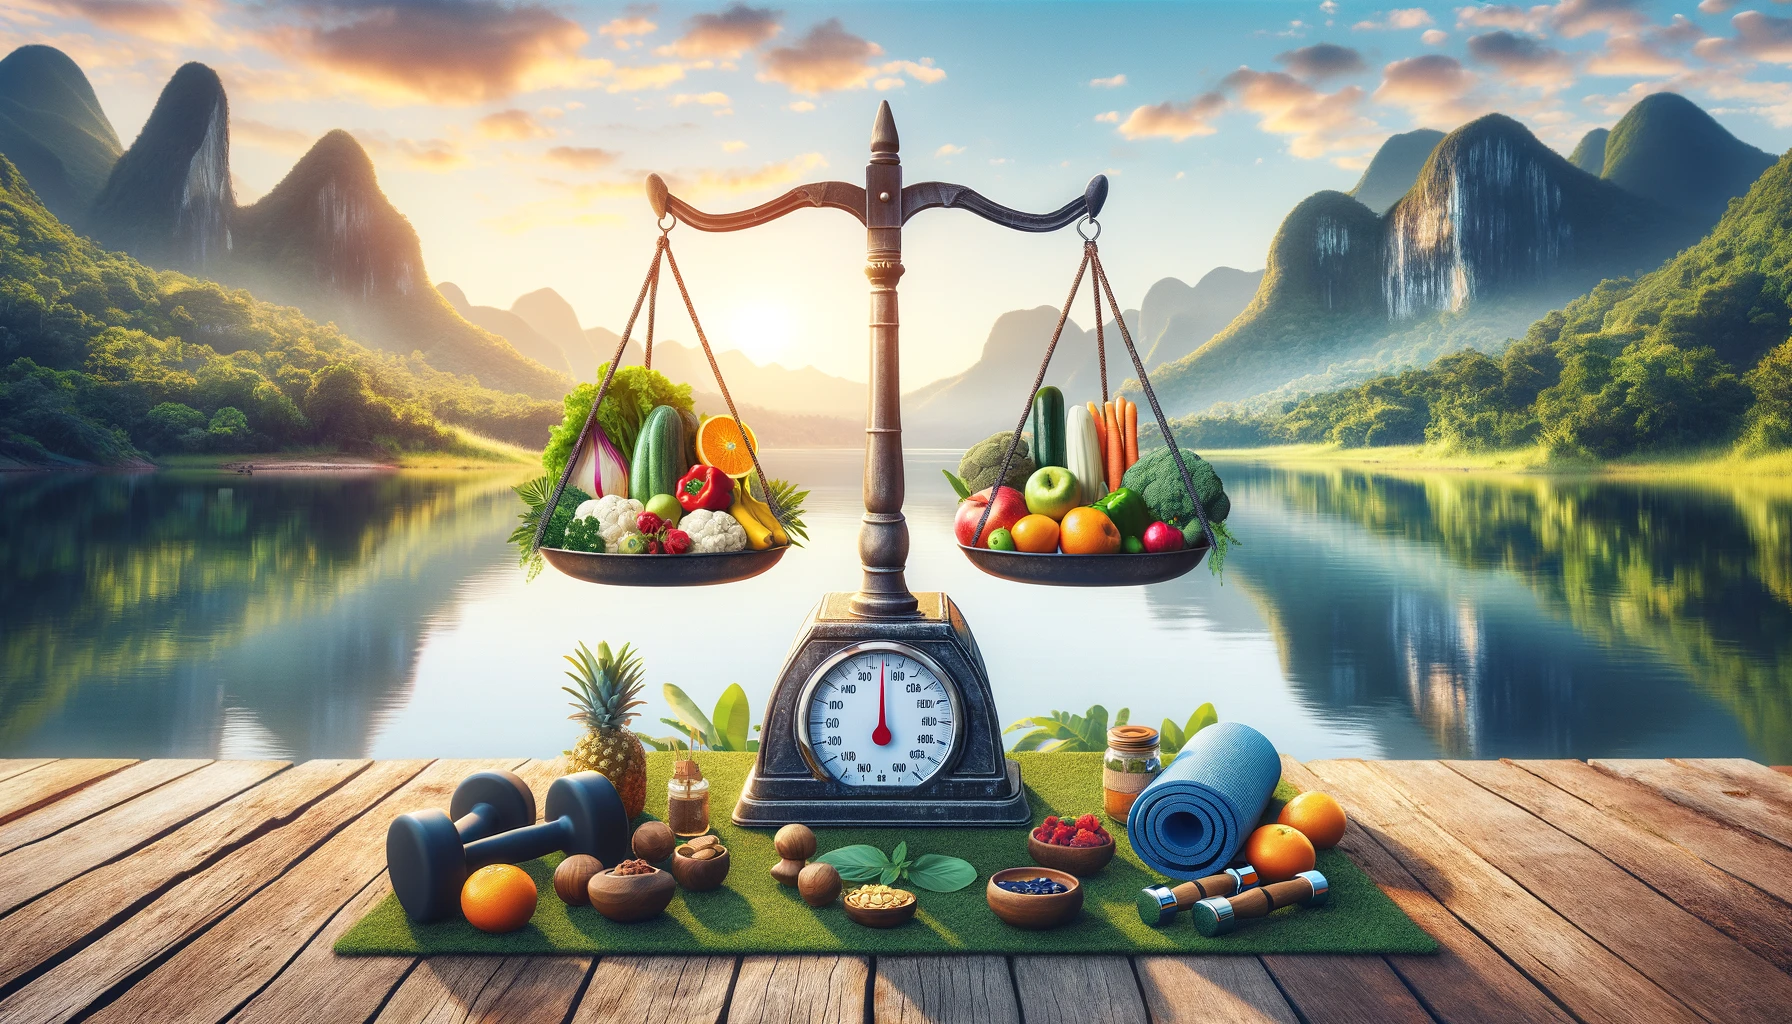  Balanced scale with healthy food and fitness gear for 